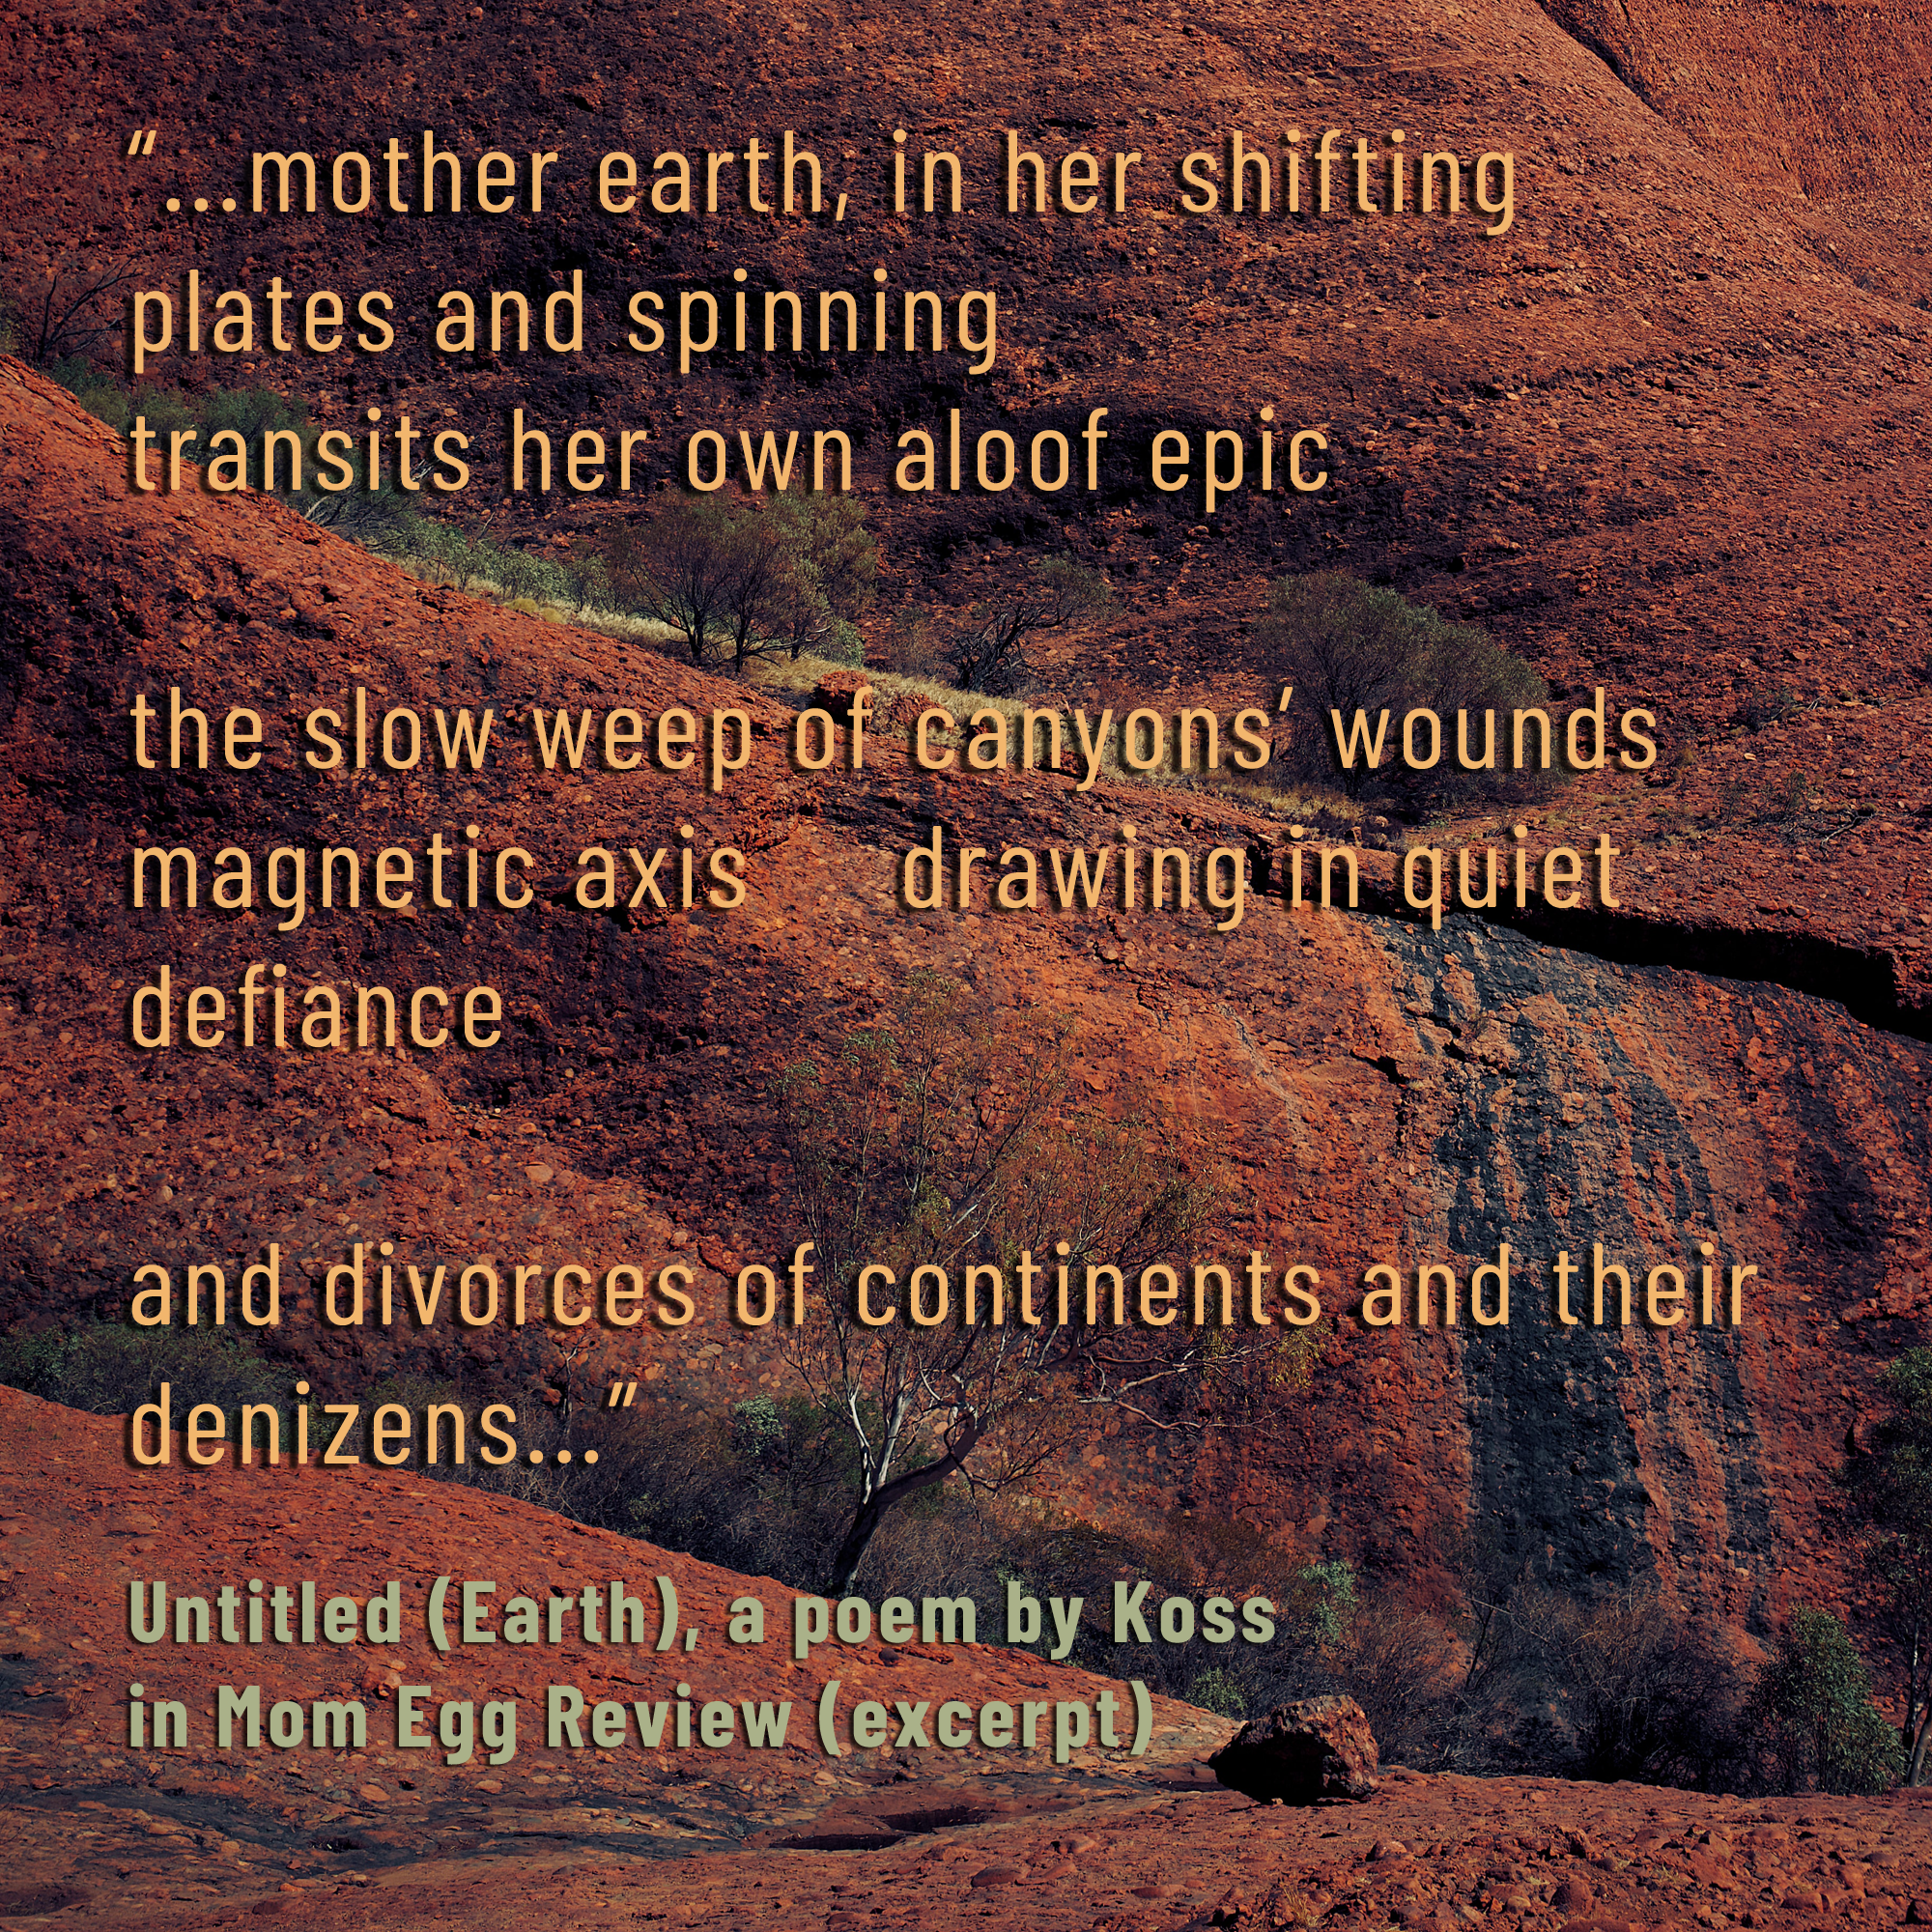 red cliff photo with an excerpt of an eco-poem by koss in Mom's Egg Review